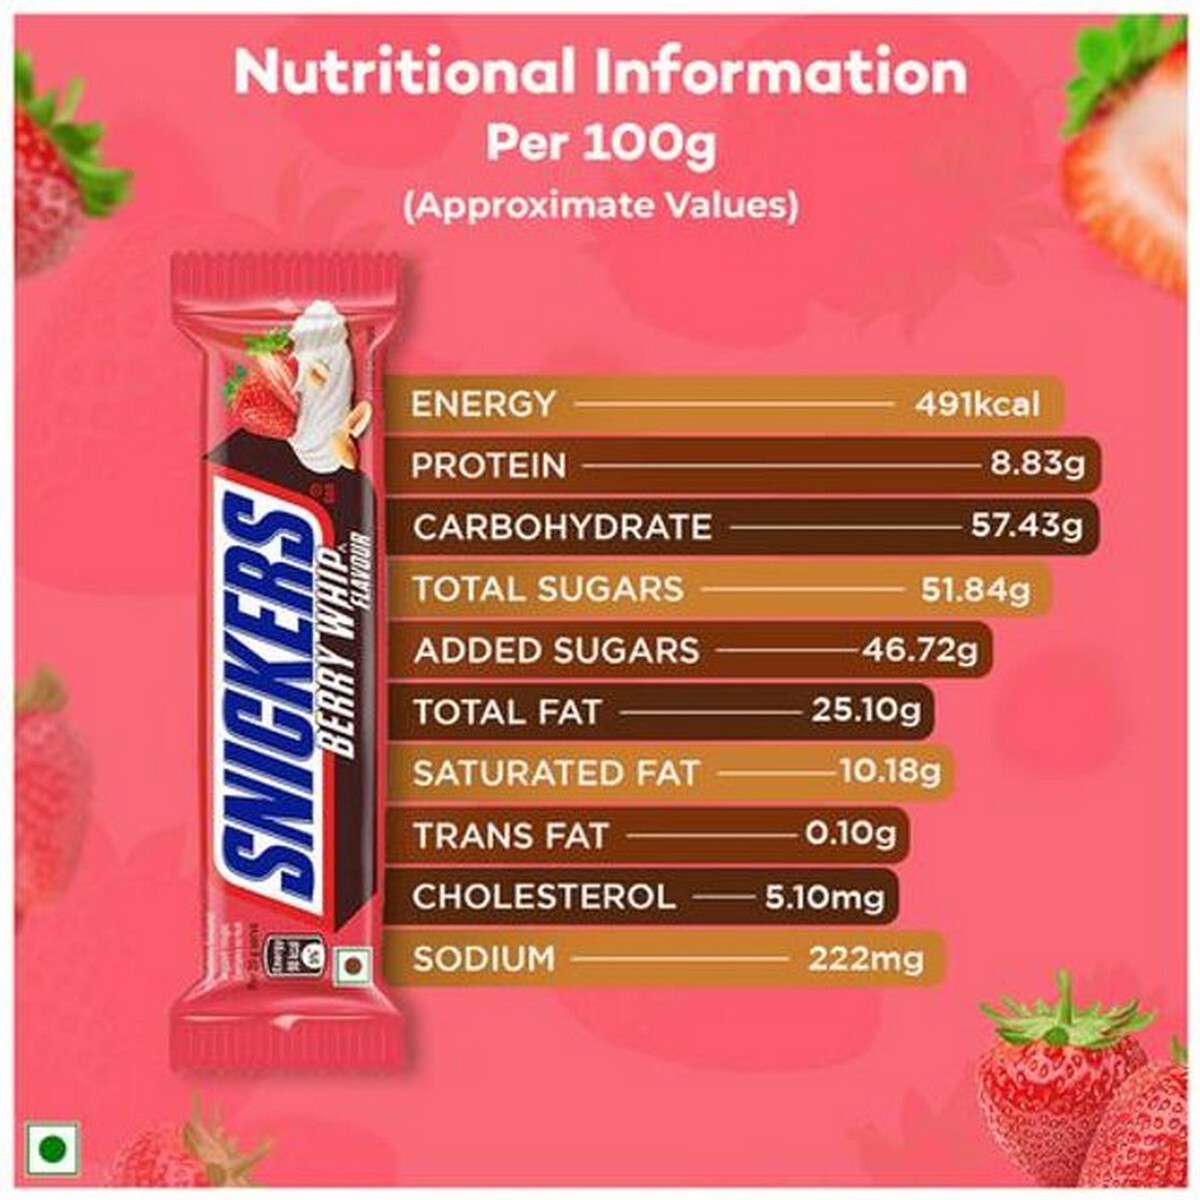 Snickers Berry Whip Bar 40g